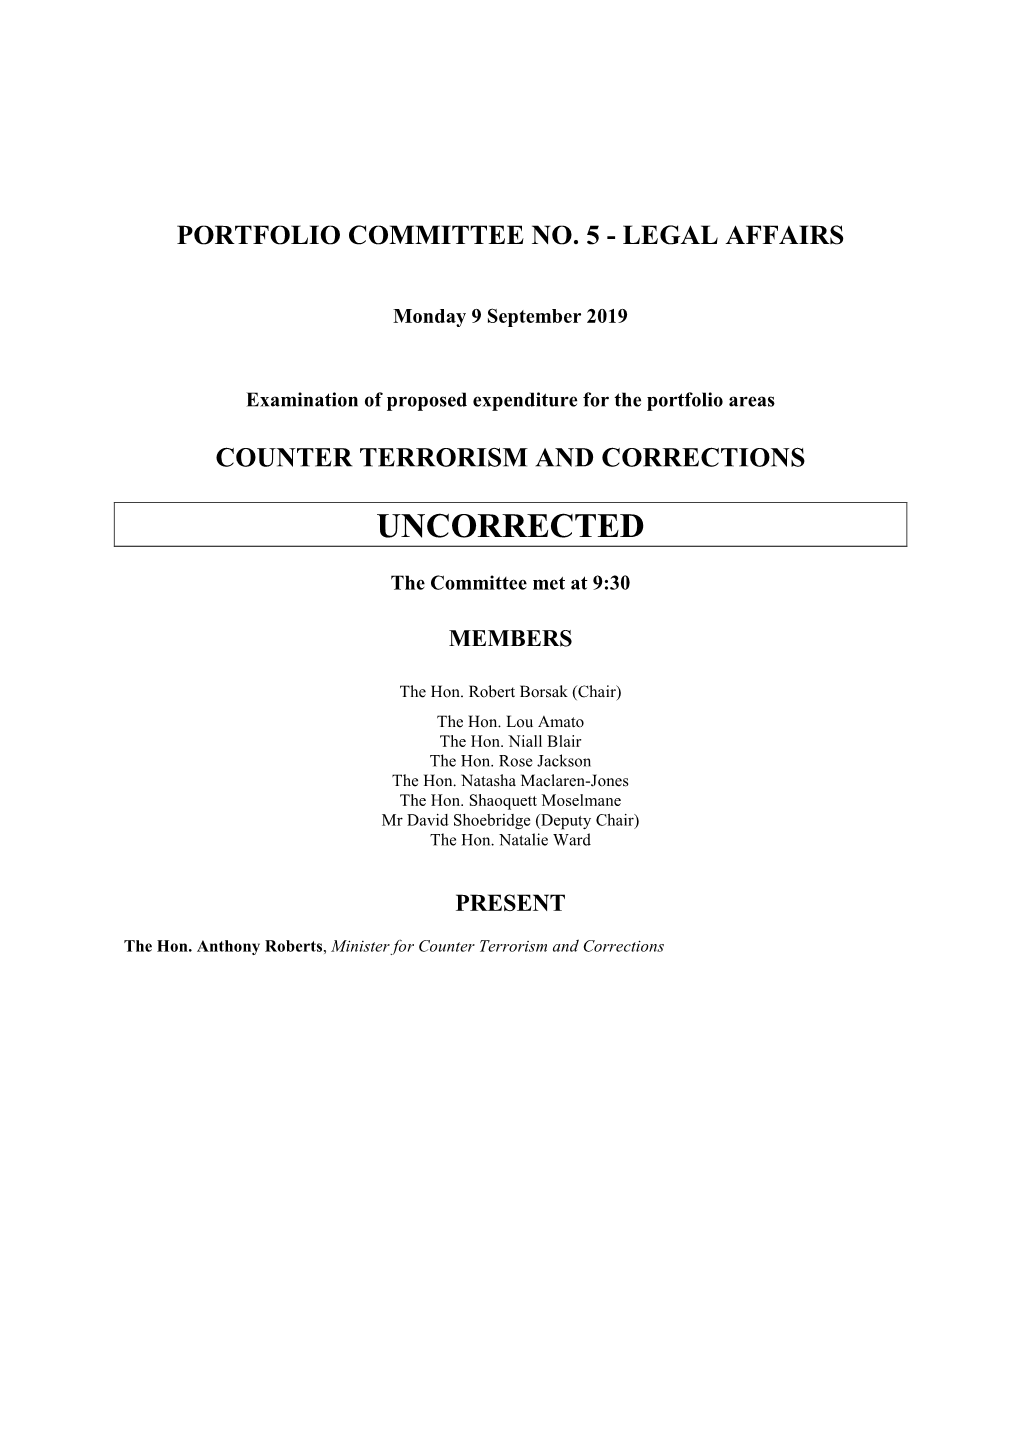 Counter Terrorism and Corrections